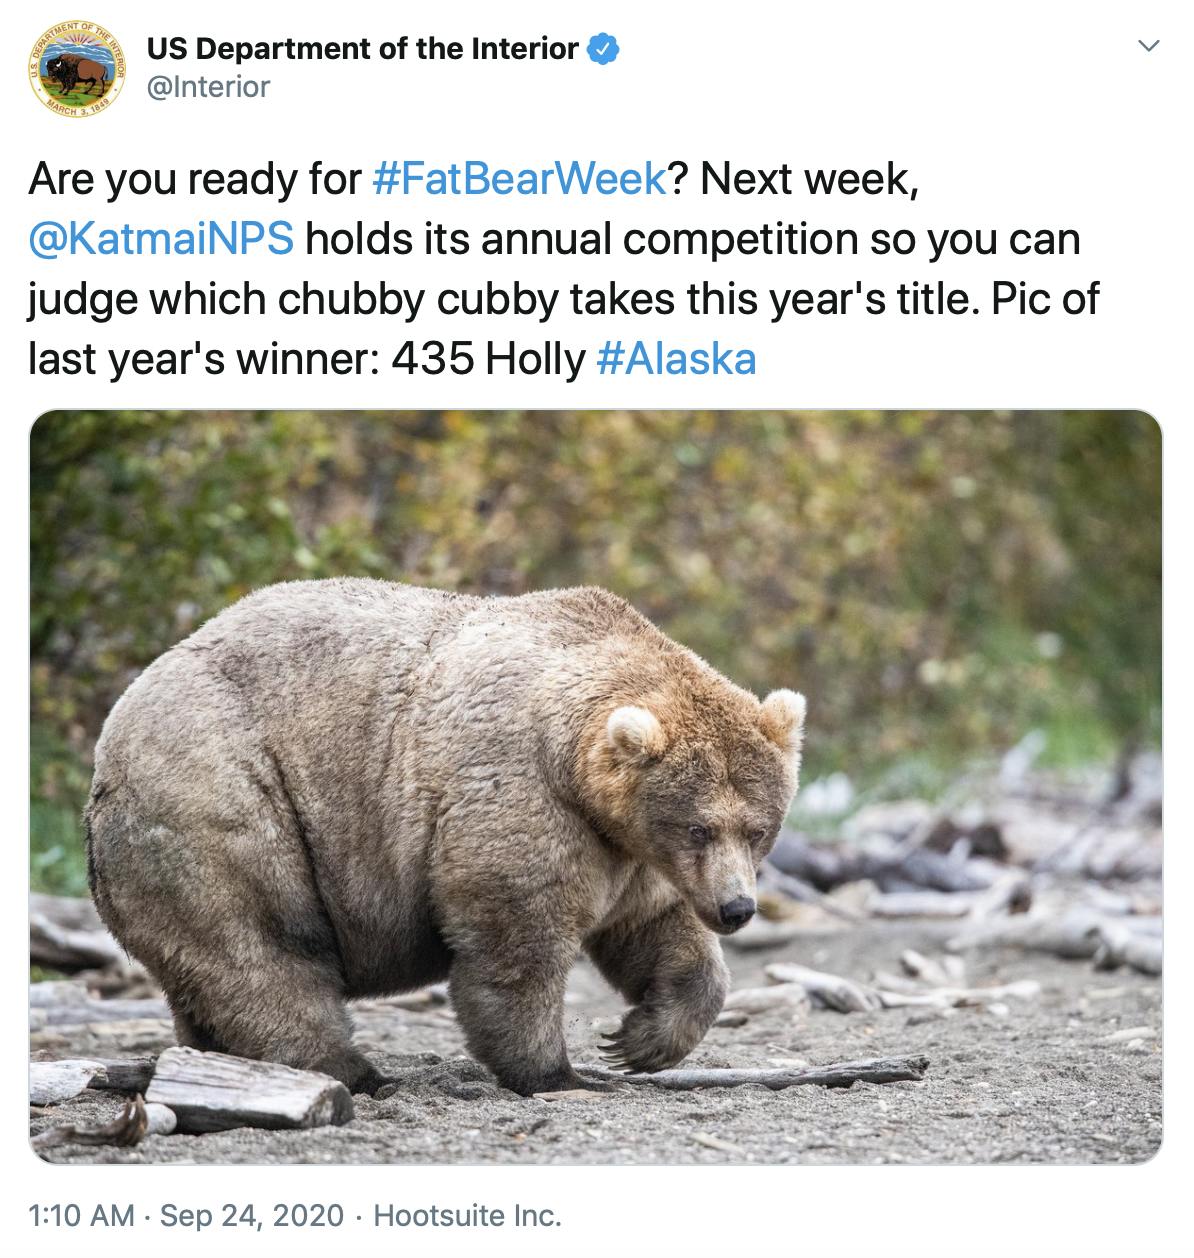 "Are you ready for #FatBearWeek? Next week,  @KatmaiNPS  holds its annual competition so you can judge which chubby cubby takes this year's title. Pic of last year's winner: 435 Holly #Alaska" photograph of a very fat brown bear